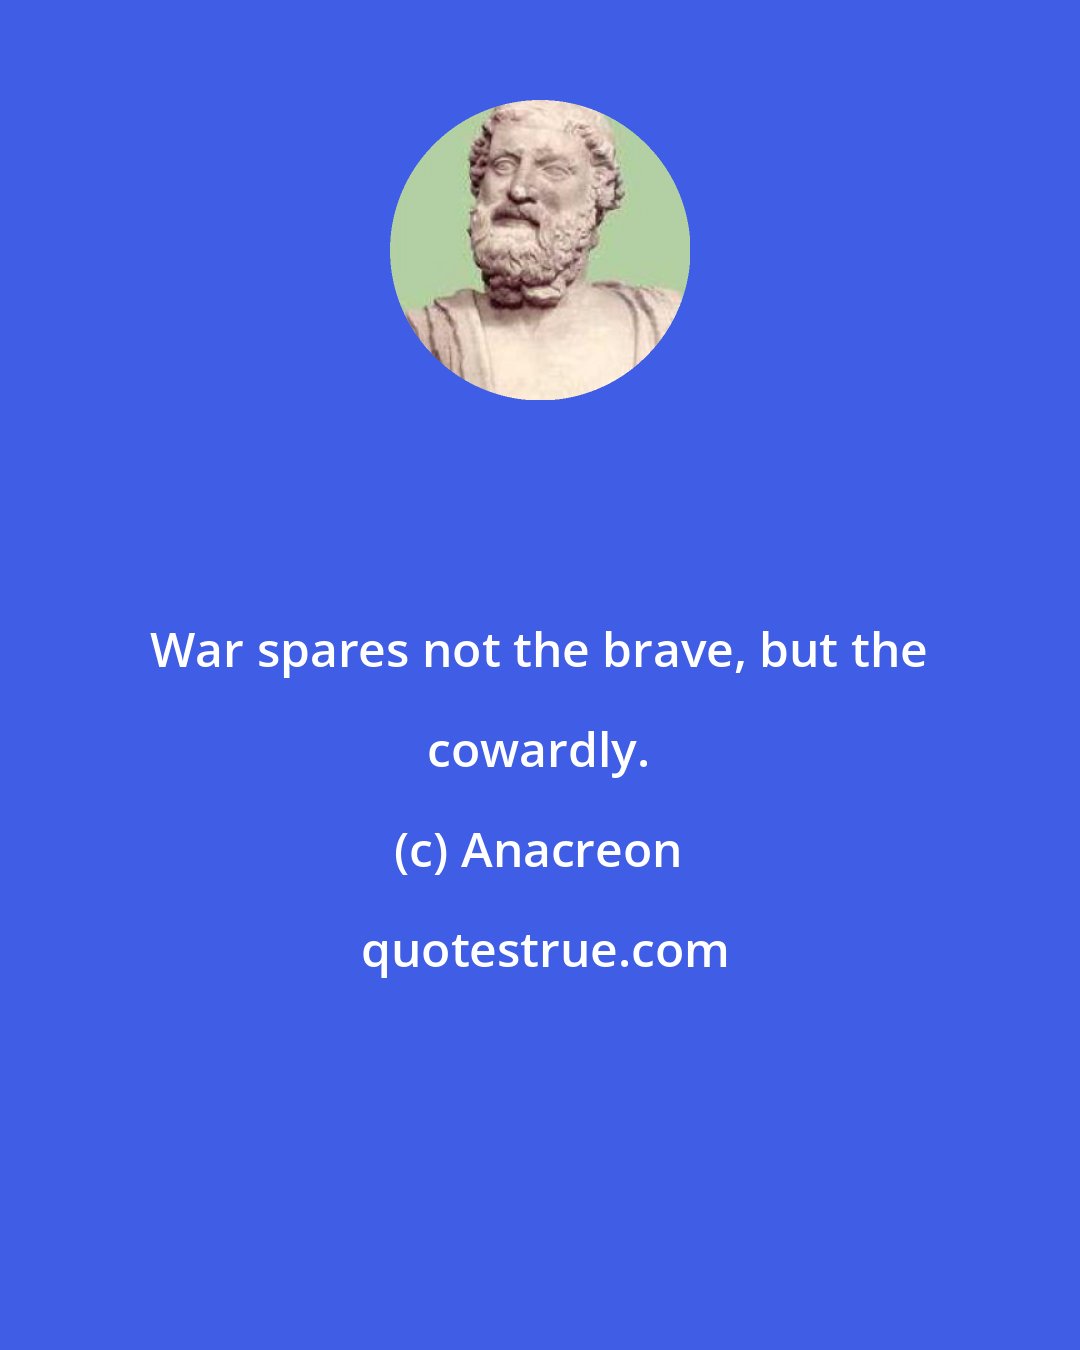 Anacreon: War spares not the brave, but the cowardly.